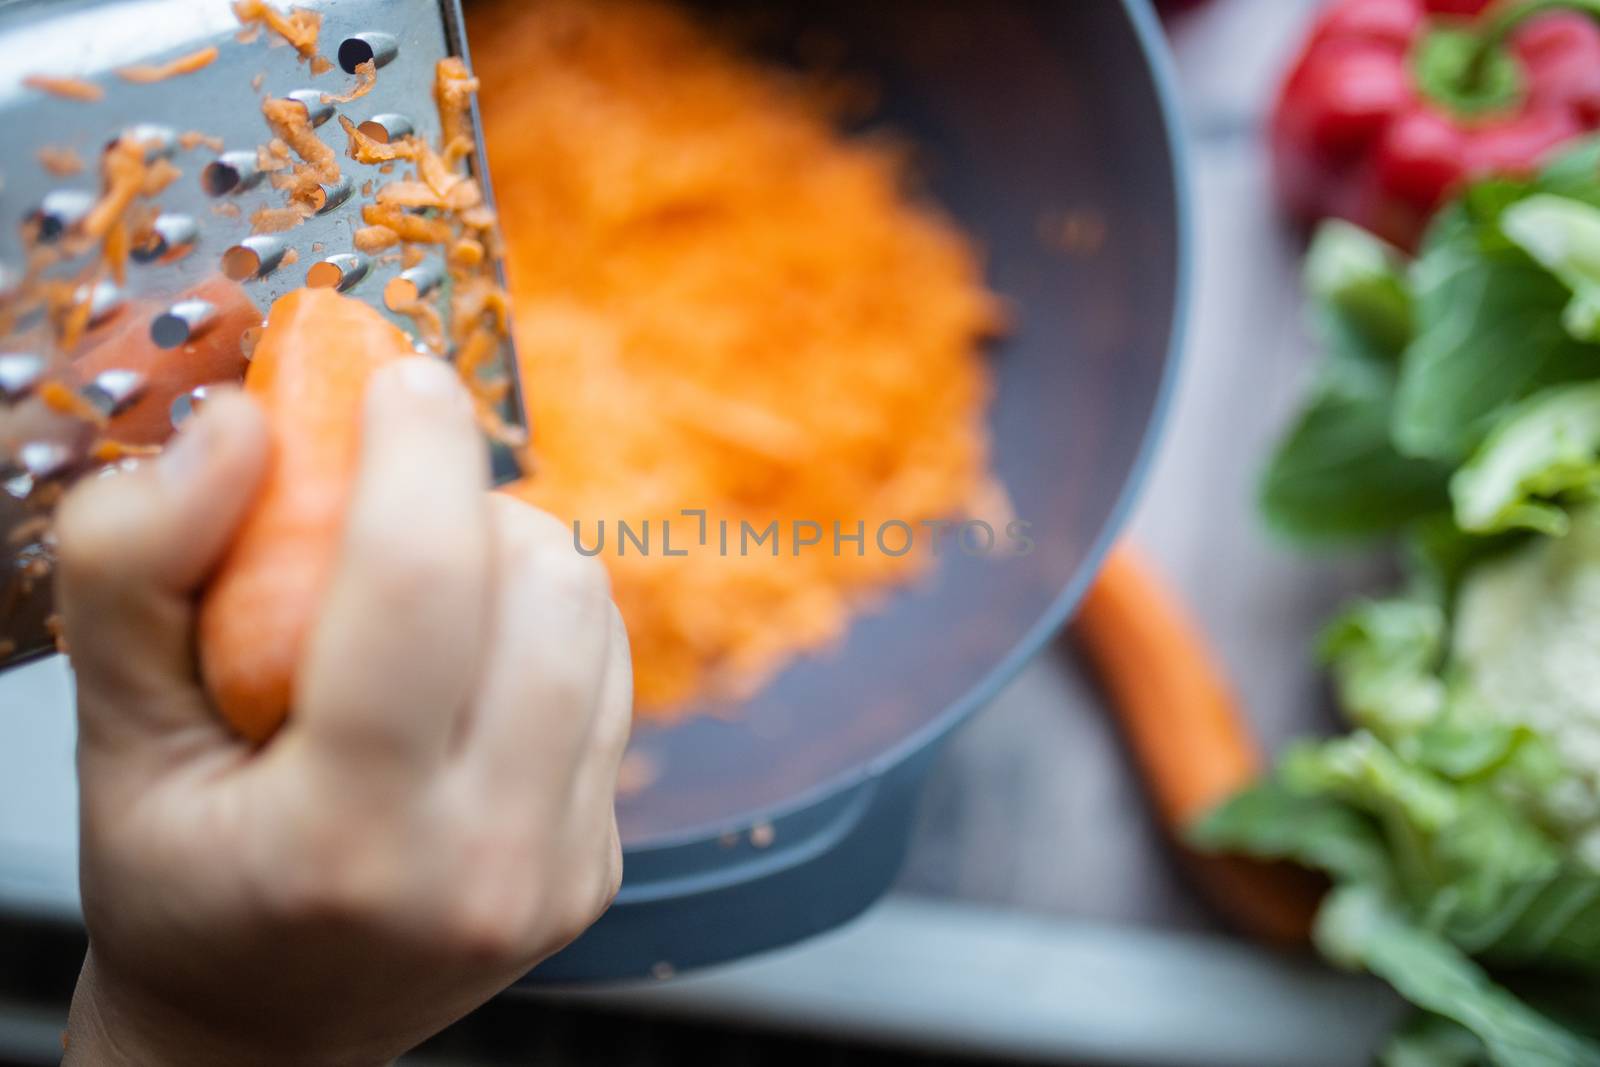 Female hands firmly grating carrot on metal grater and into bowl. Shredded carrots in bowl surrounded by vegetables. Vegan meal preparation